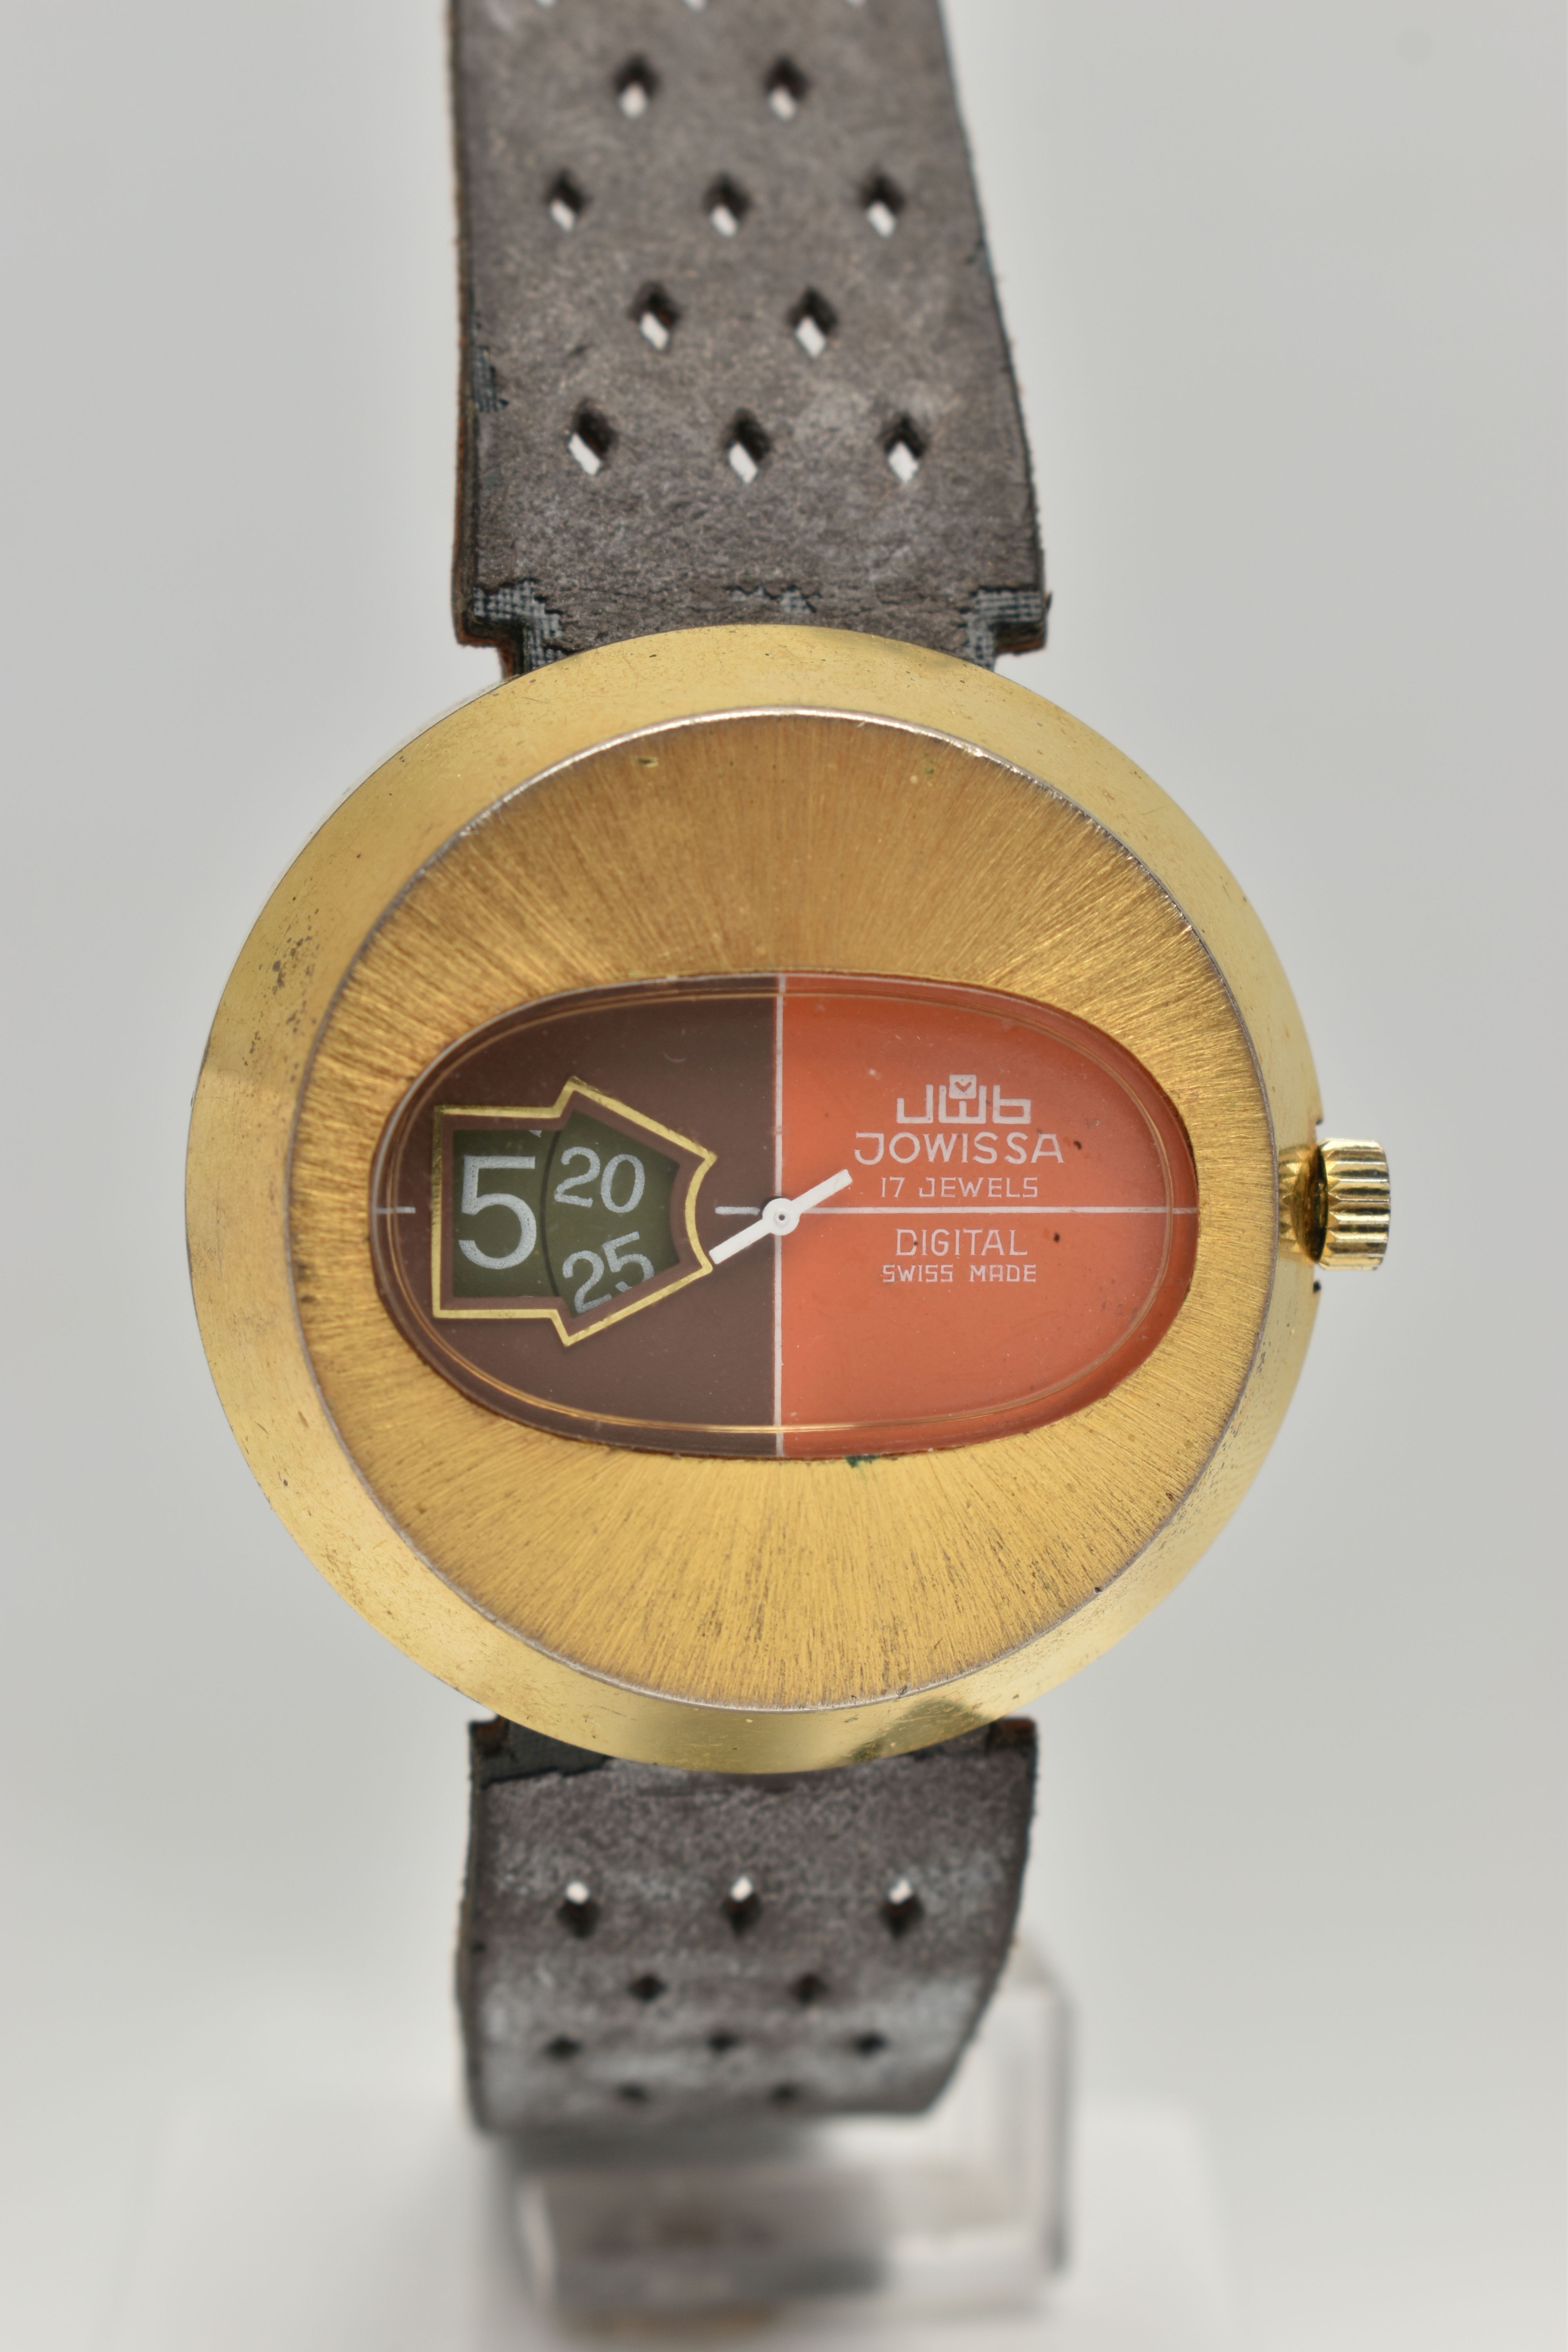 A VINTAGE JOWISSA DIGITAL WRISTWATCH, brown and orange dial with white hands, date window, the